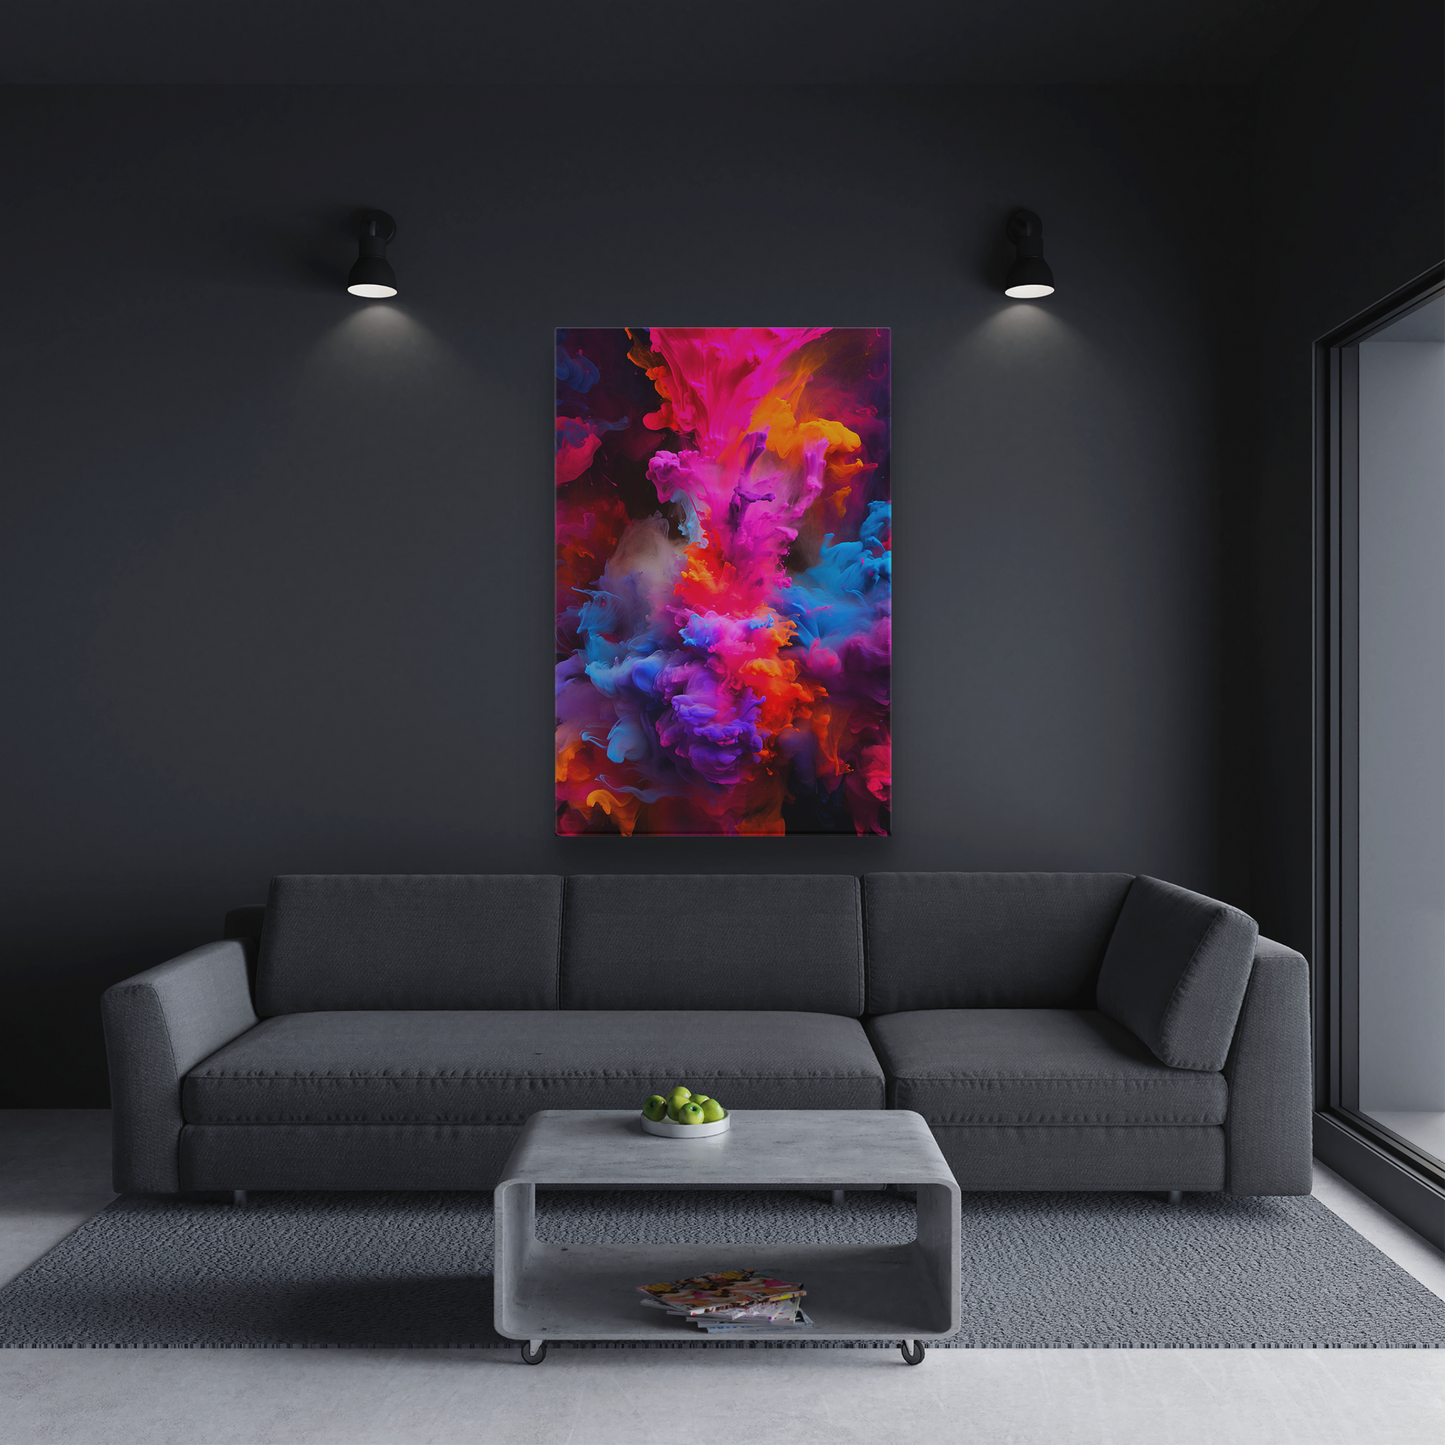 Vivid Eruption (Canvas)Vivid Eruption (Canvas  Matte finish, stretched, with a depth of 1.25 inches) Elevate your décor with RimaGallery’s responsibly made art canvases. Our eco-friendly mRimaGallery